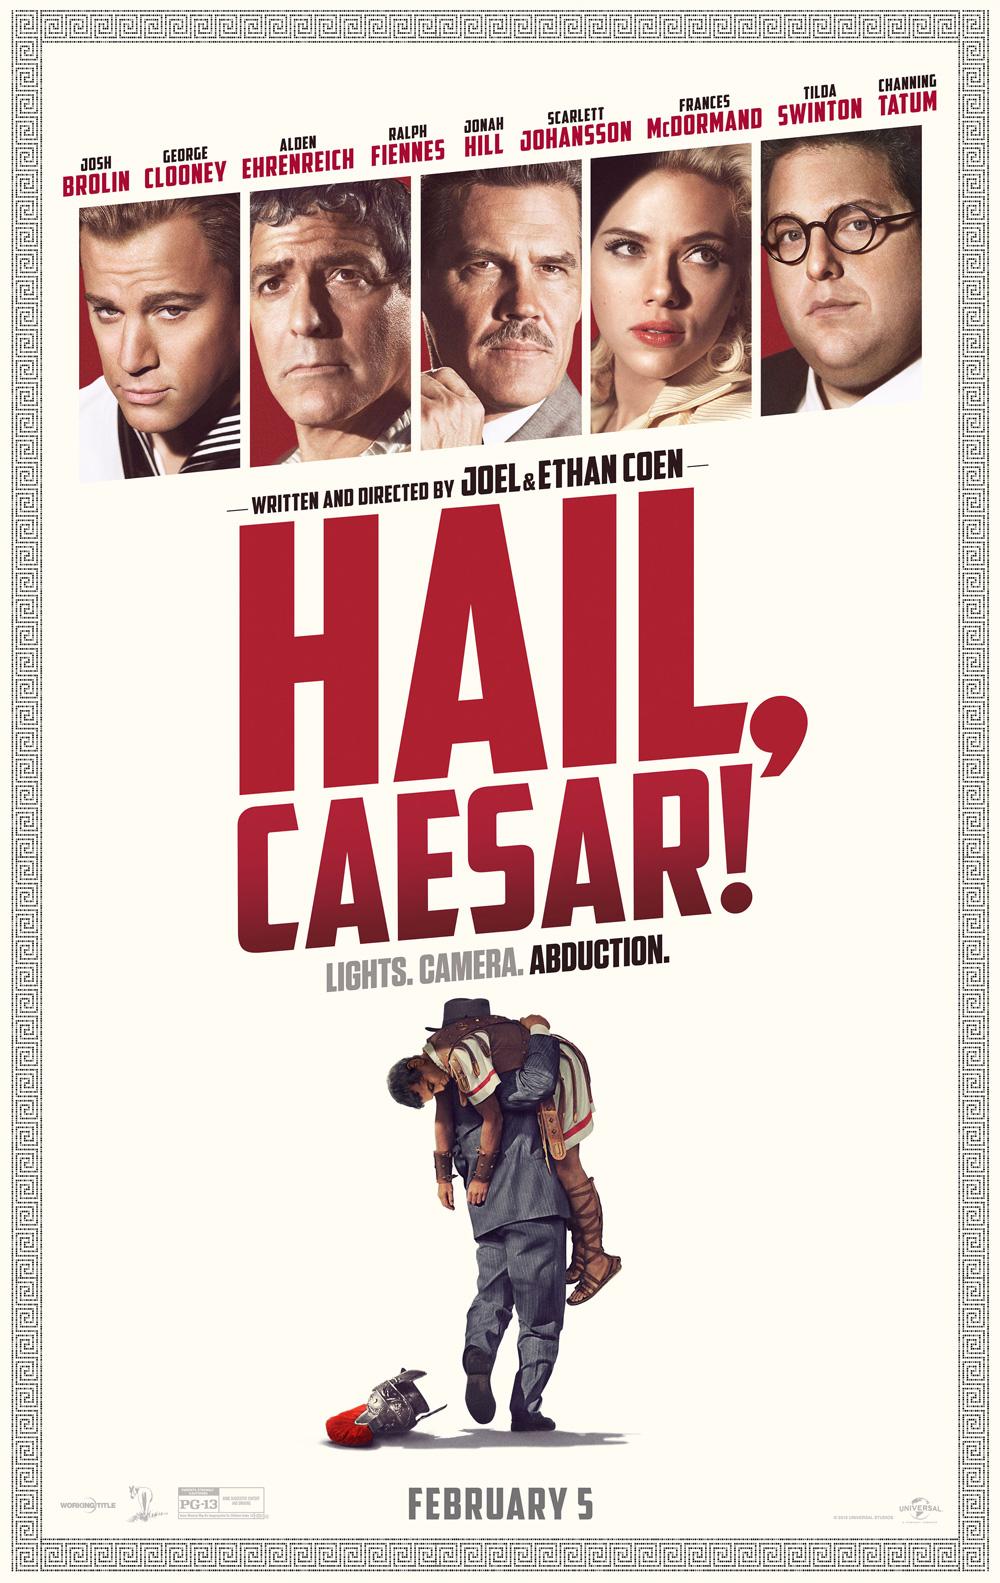 Hail, Caesar! Poster. In Theaters Now